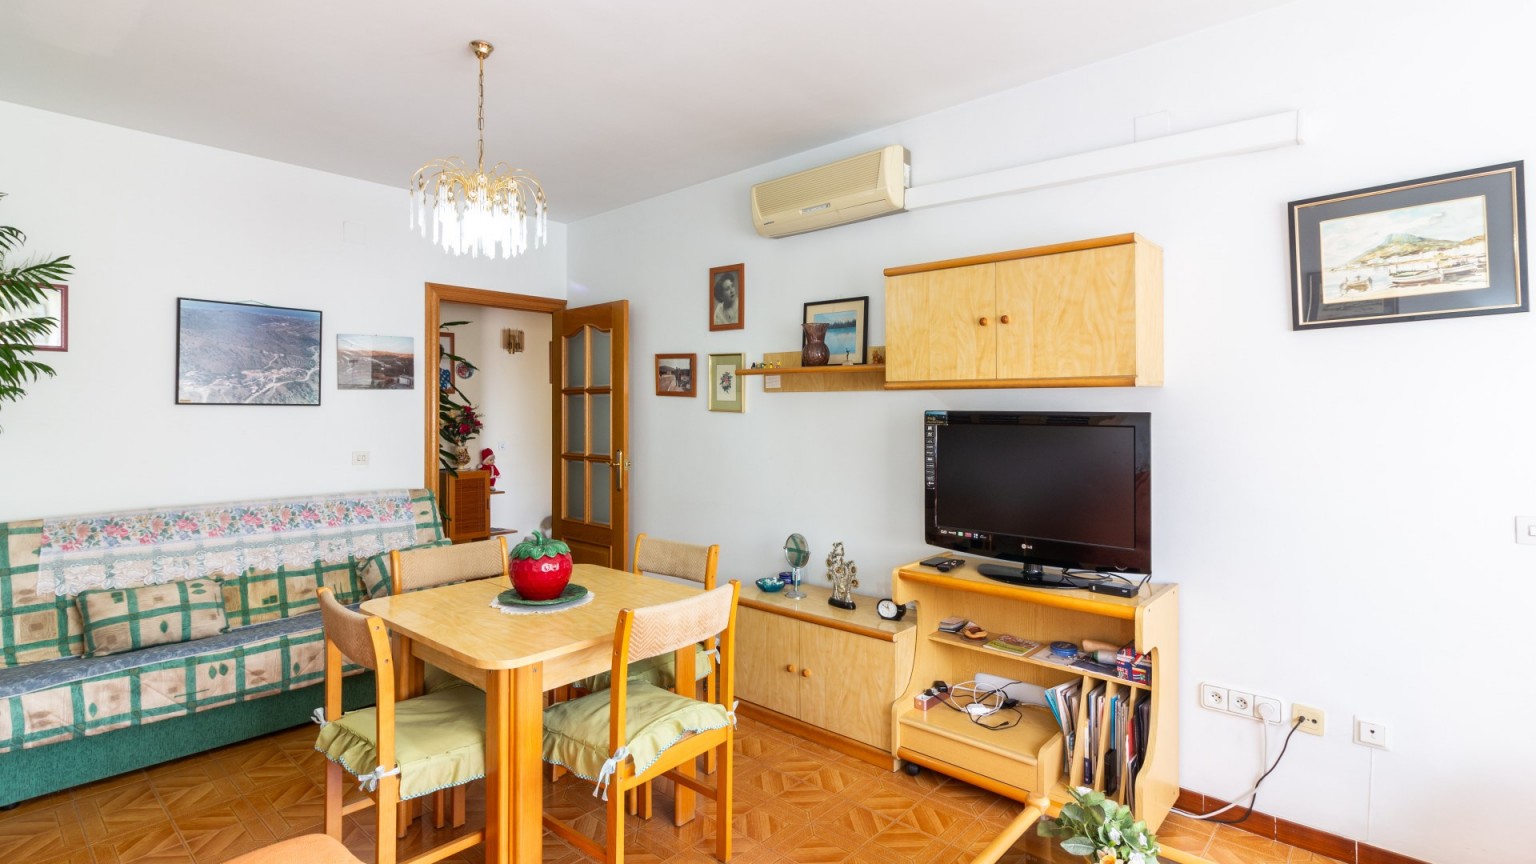 Apartment for sale with 3 bedrooms in the centre of Roses.